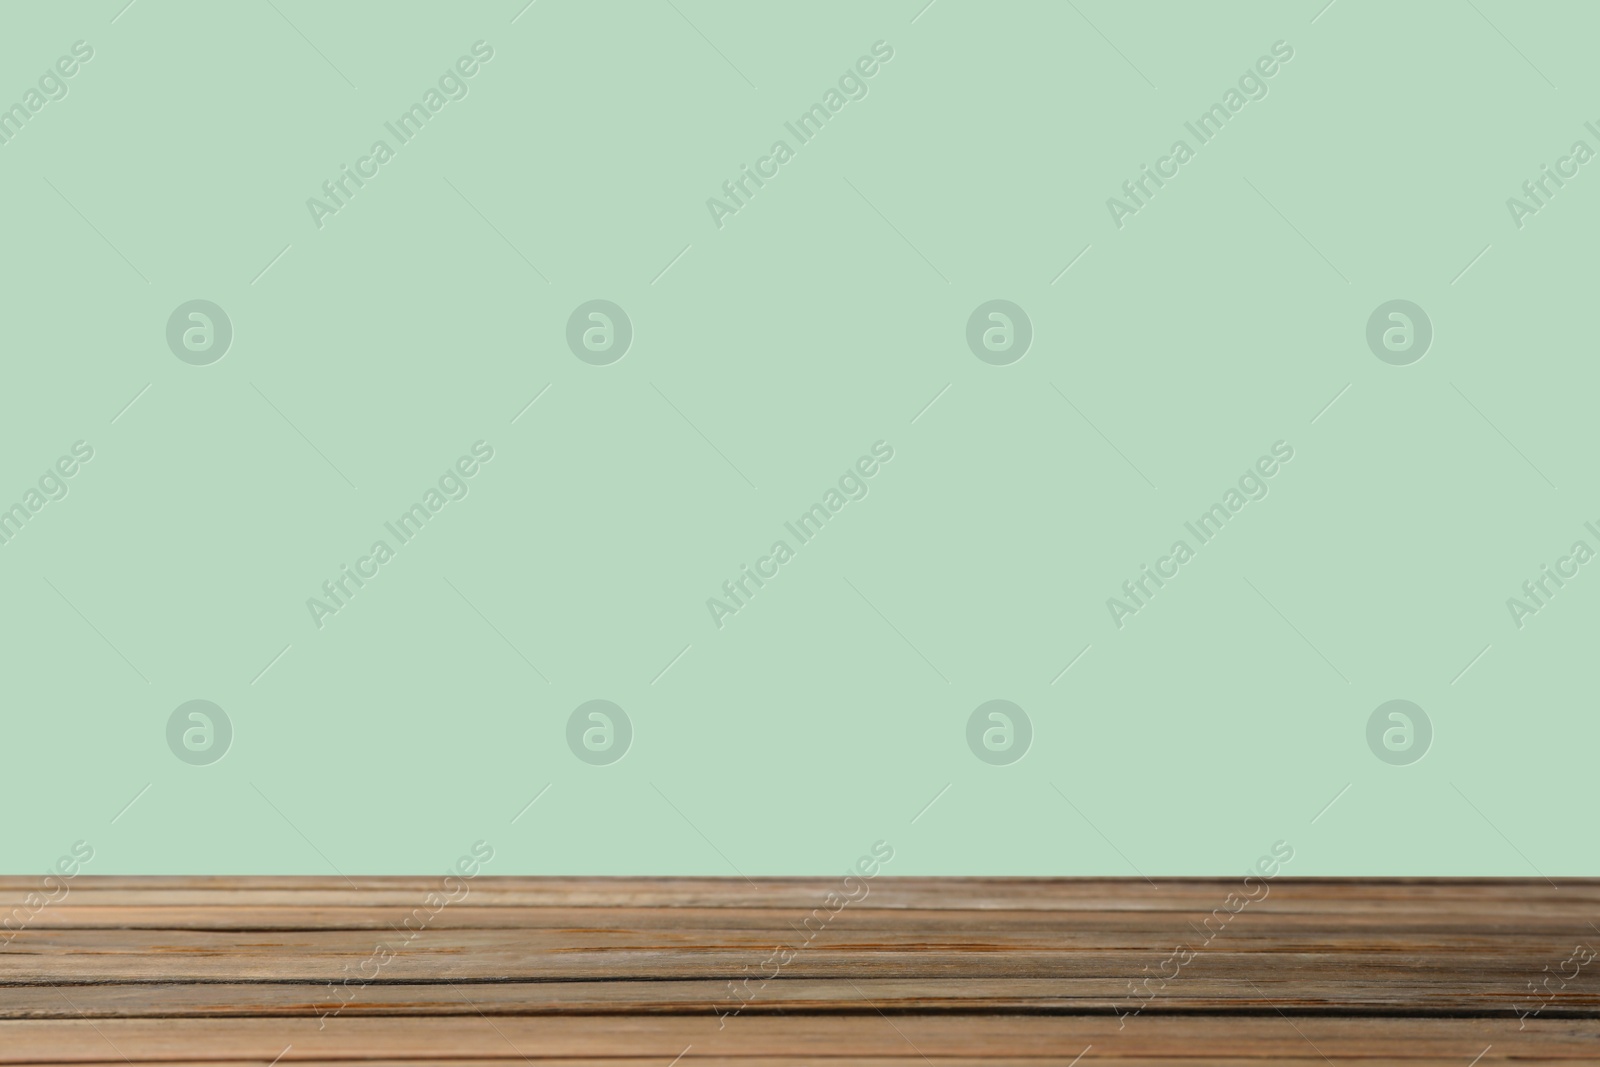 Image of Empty wooden surface on mint background. Mockup for design